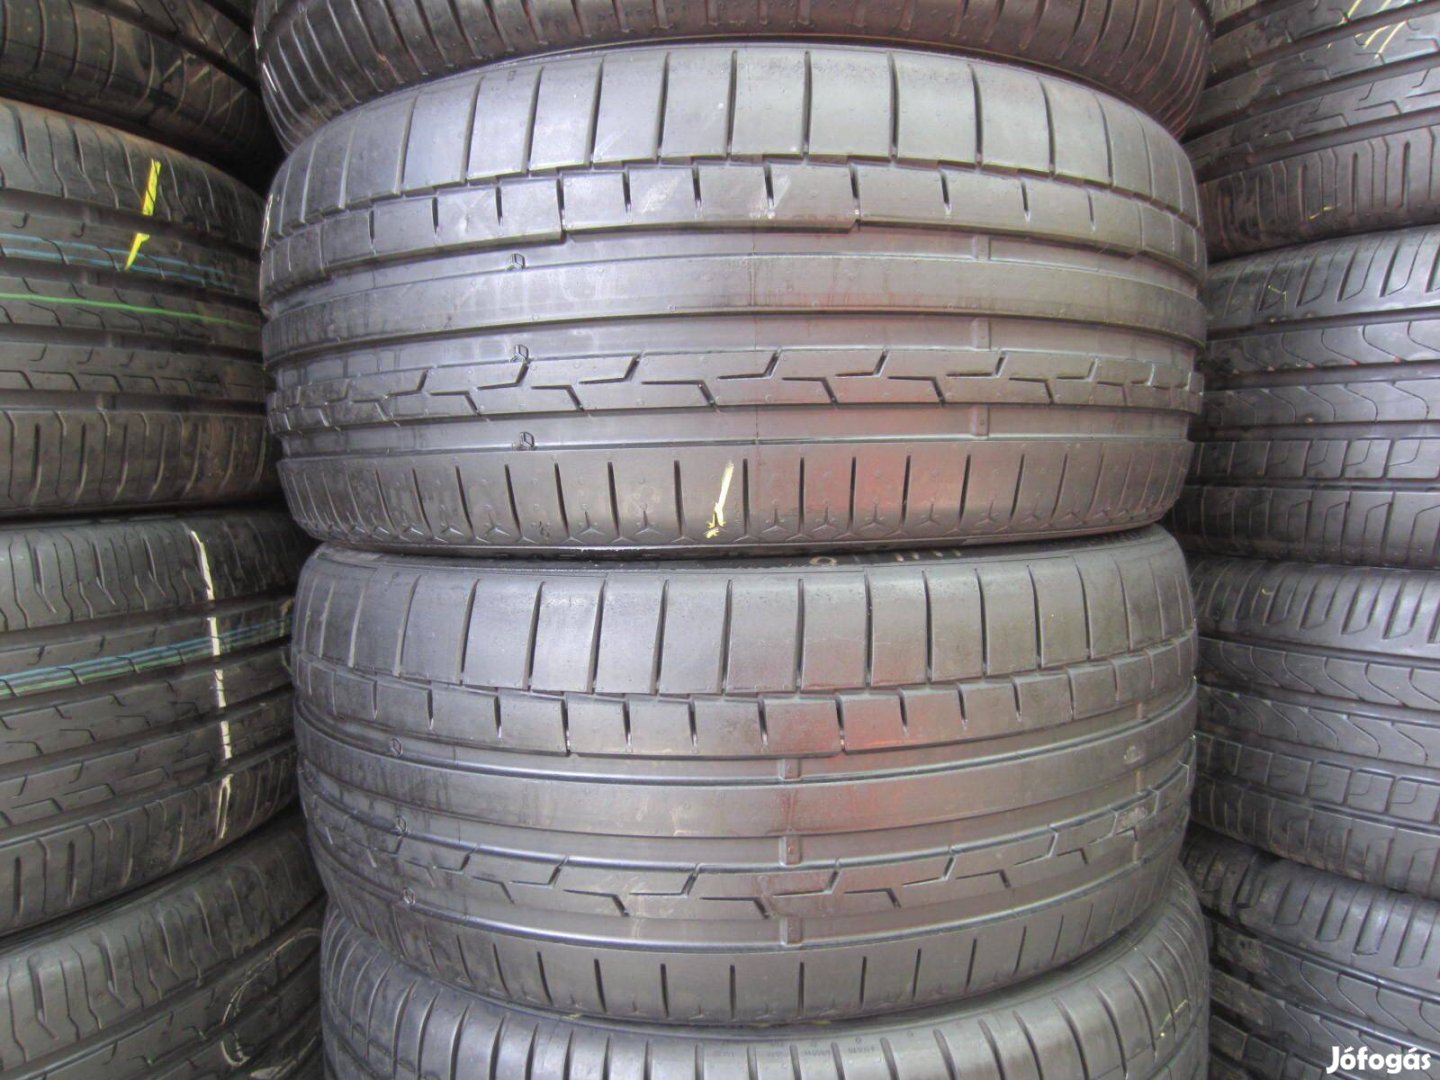 245/35 R20 Continental Sportcontact6 95Y